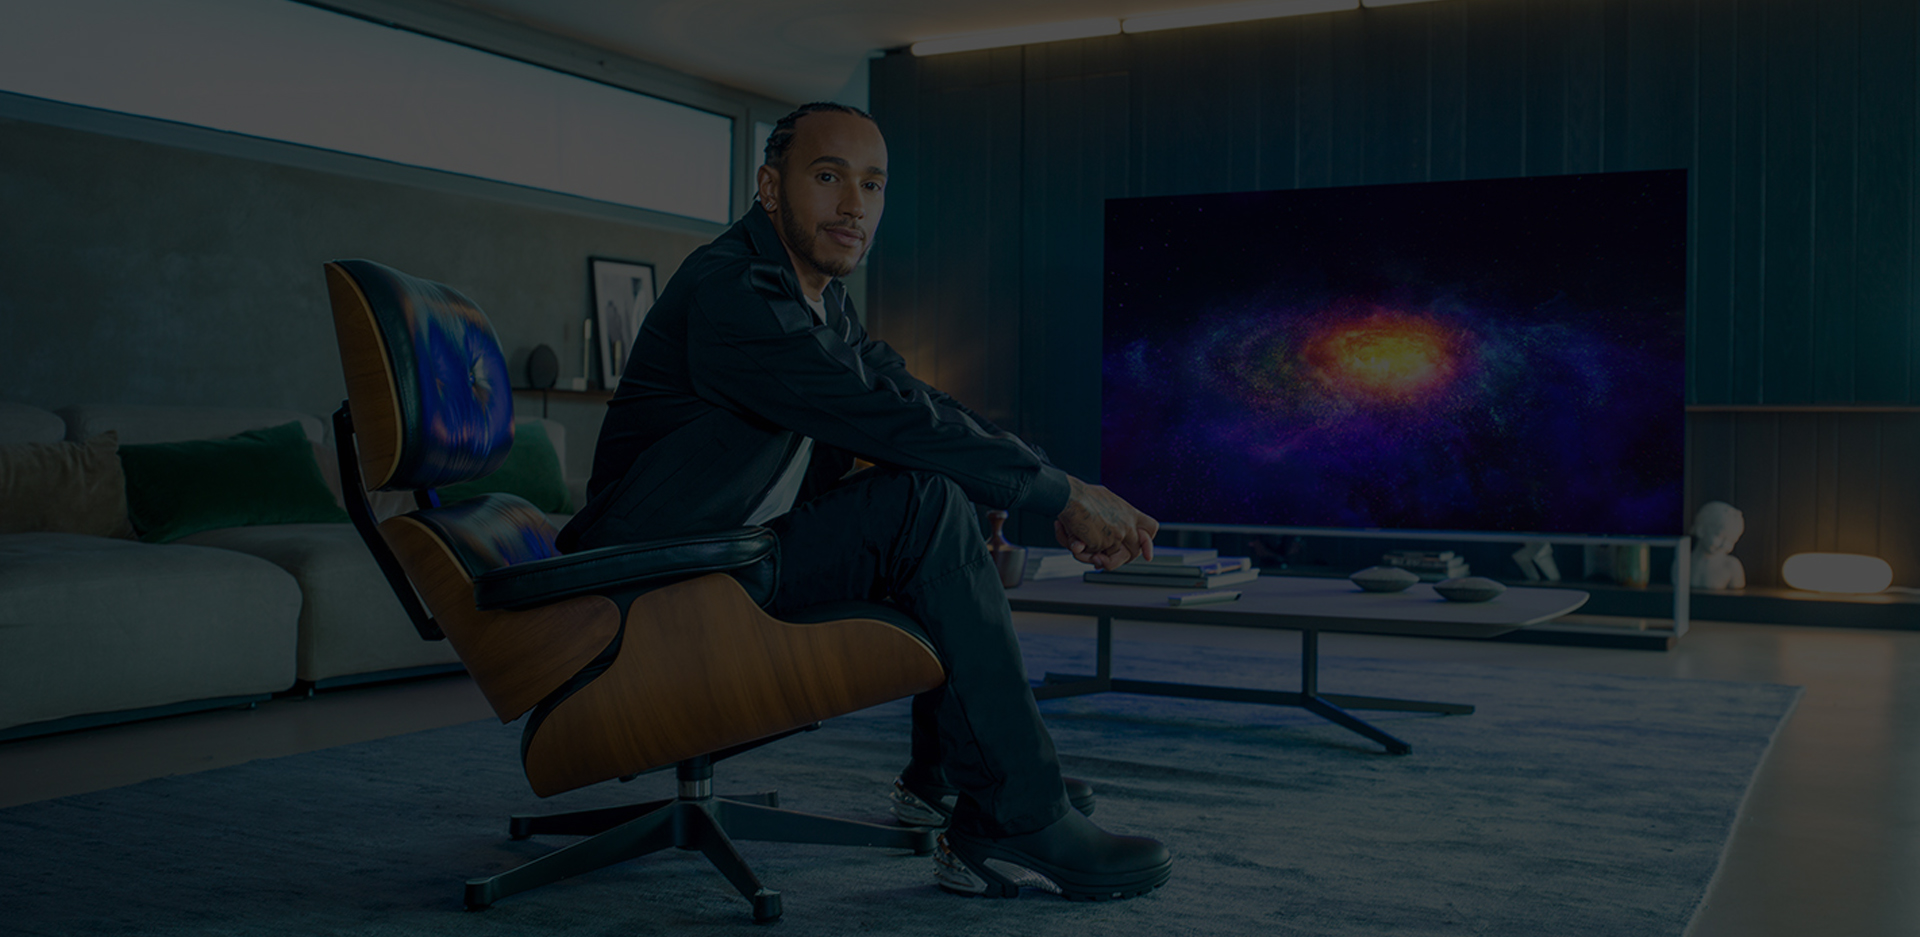 Lewis Hamilton sitting on a couch and behind him is the LG SIGNATURE OLED 8K TV.